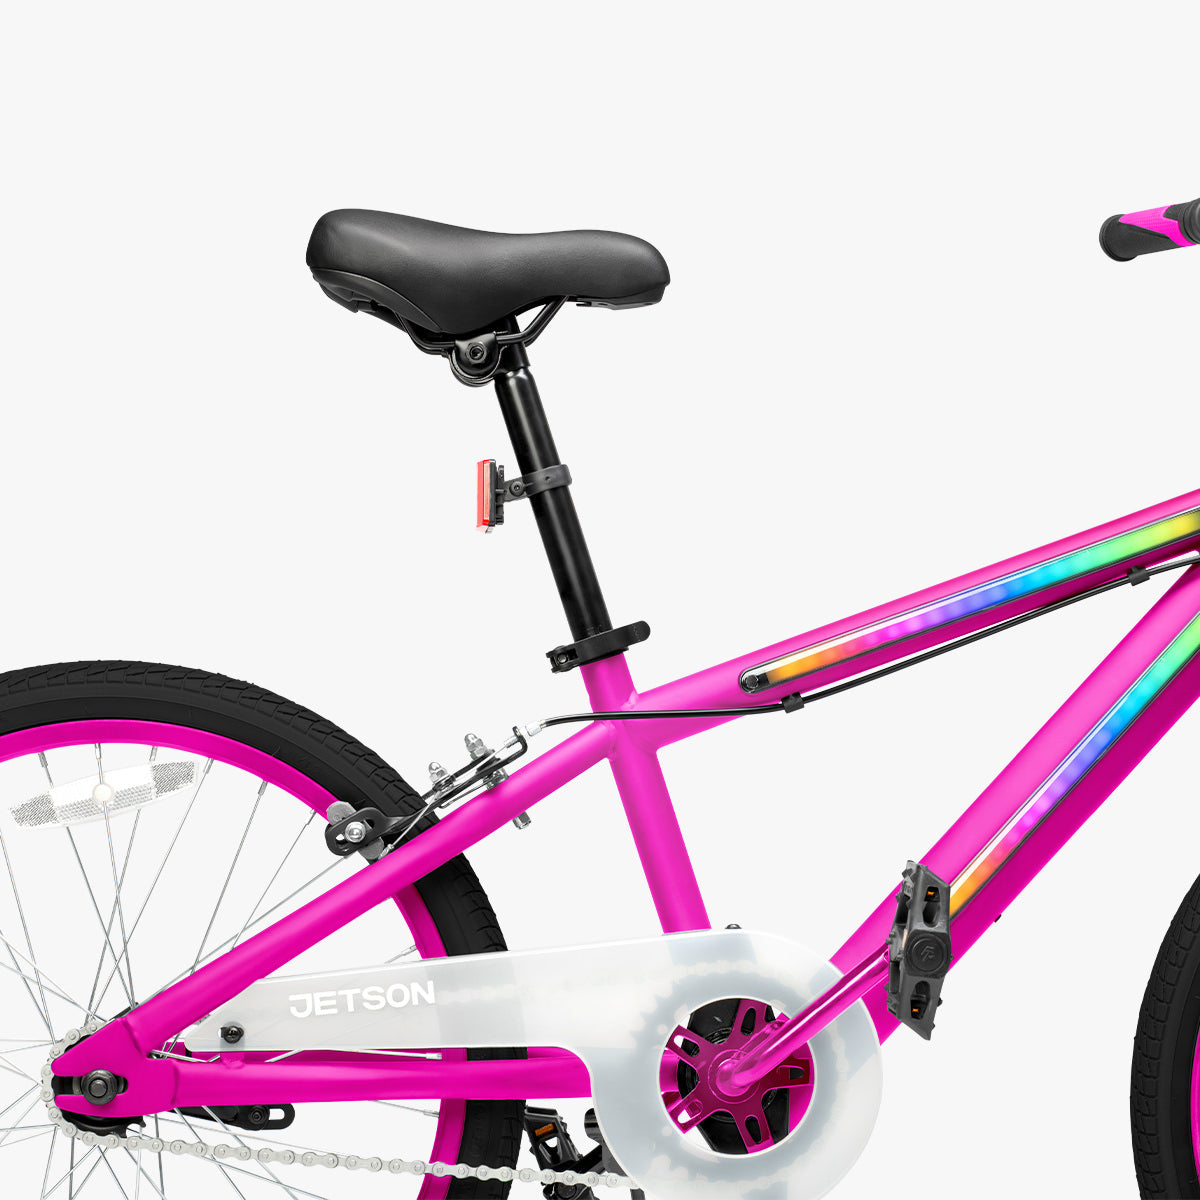 close up of pink JLR X bike with the bike seat extended